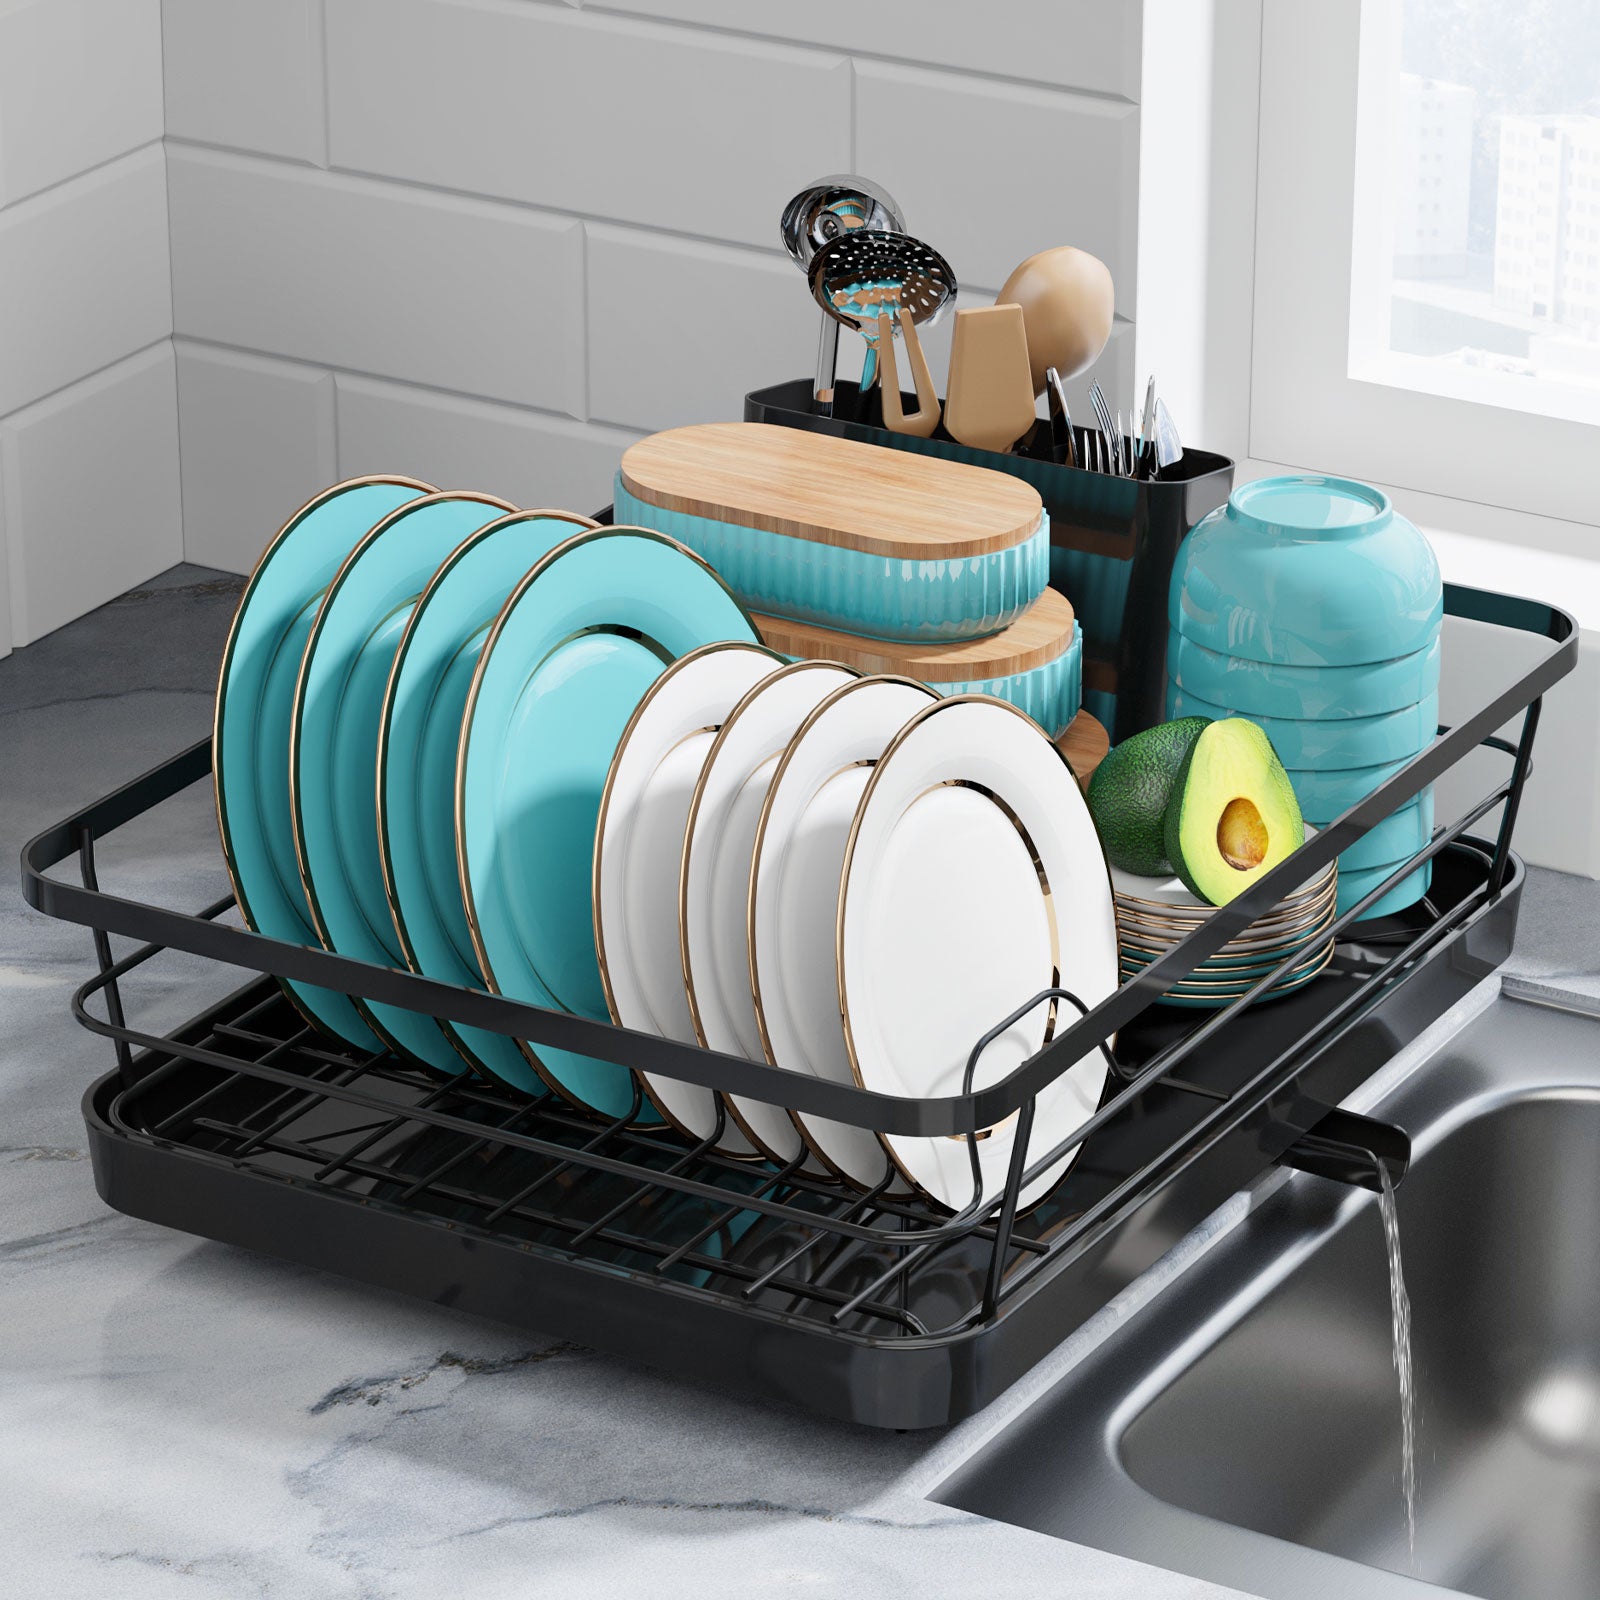 Dish Drying Rack,Kitchen Dish Rack,Dish Drainer Counter with